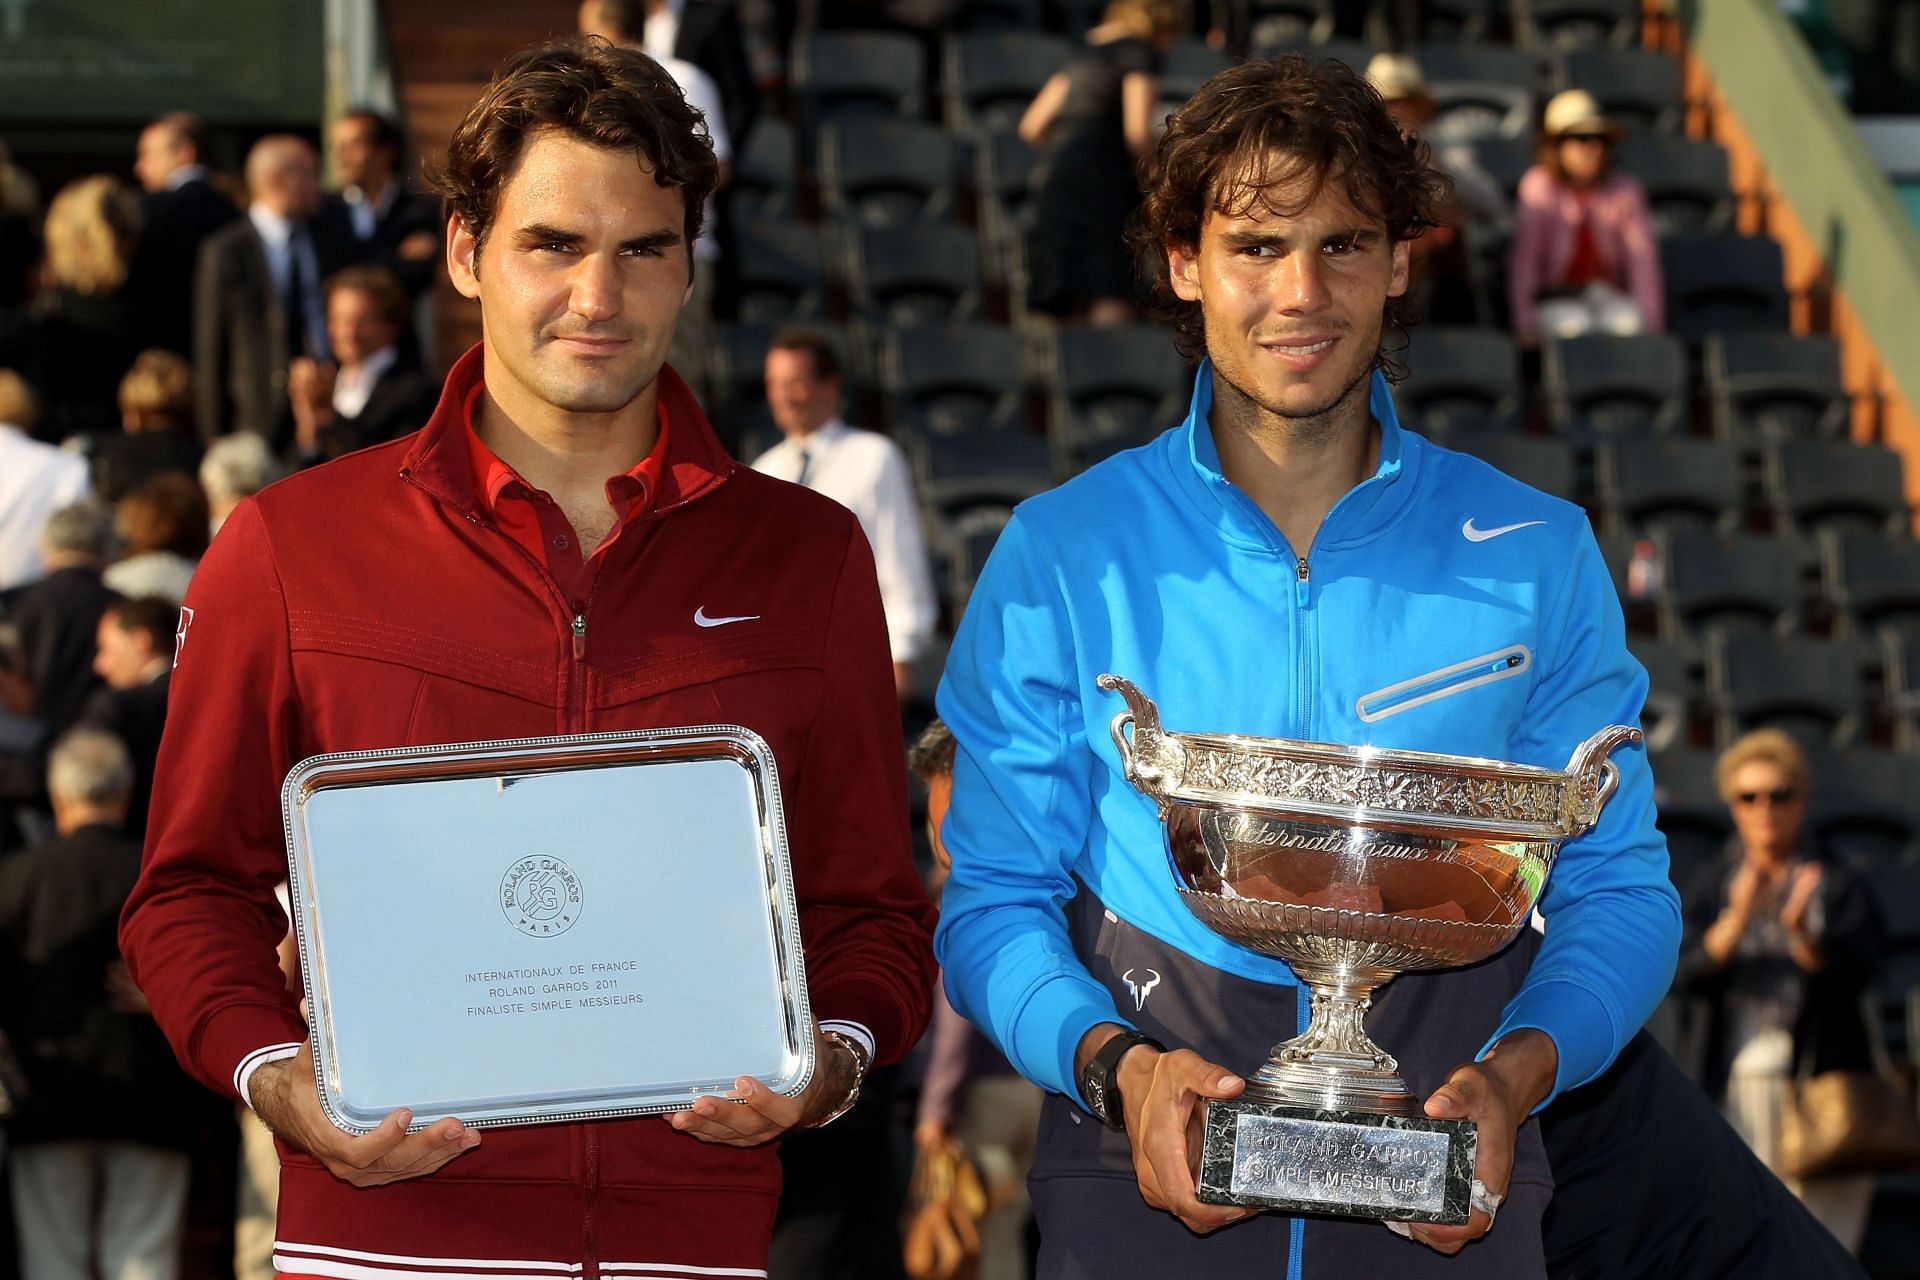 The Spaniard defeated Roger Federer in the 2011 French Open final